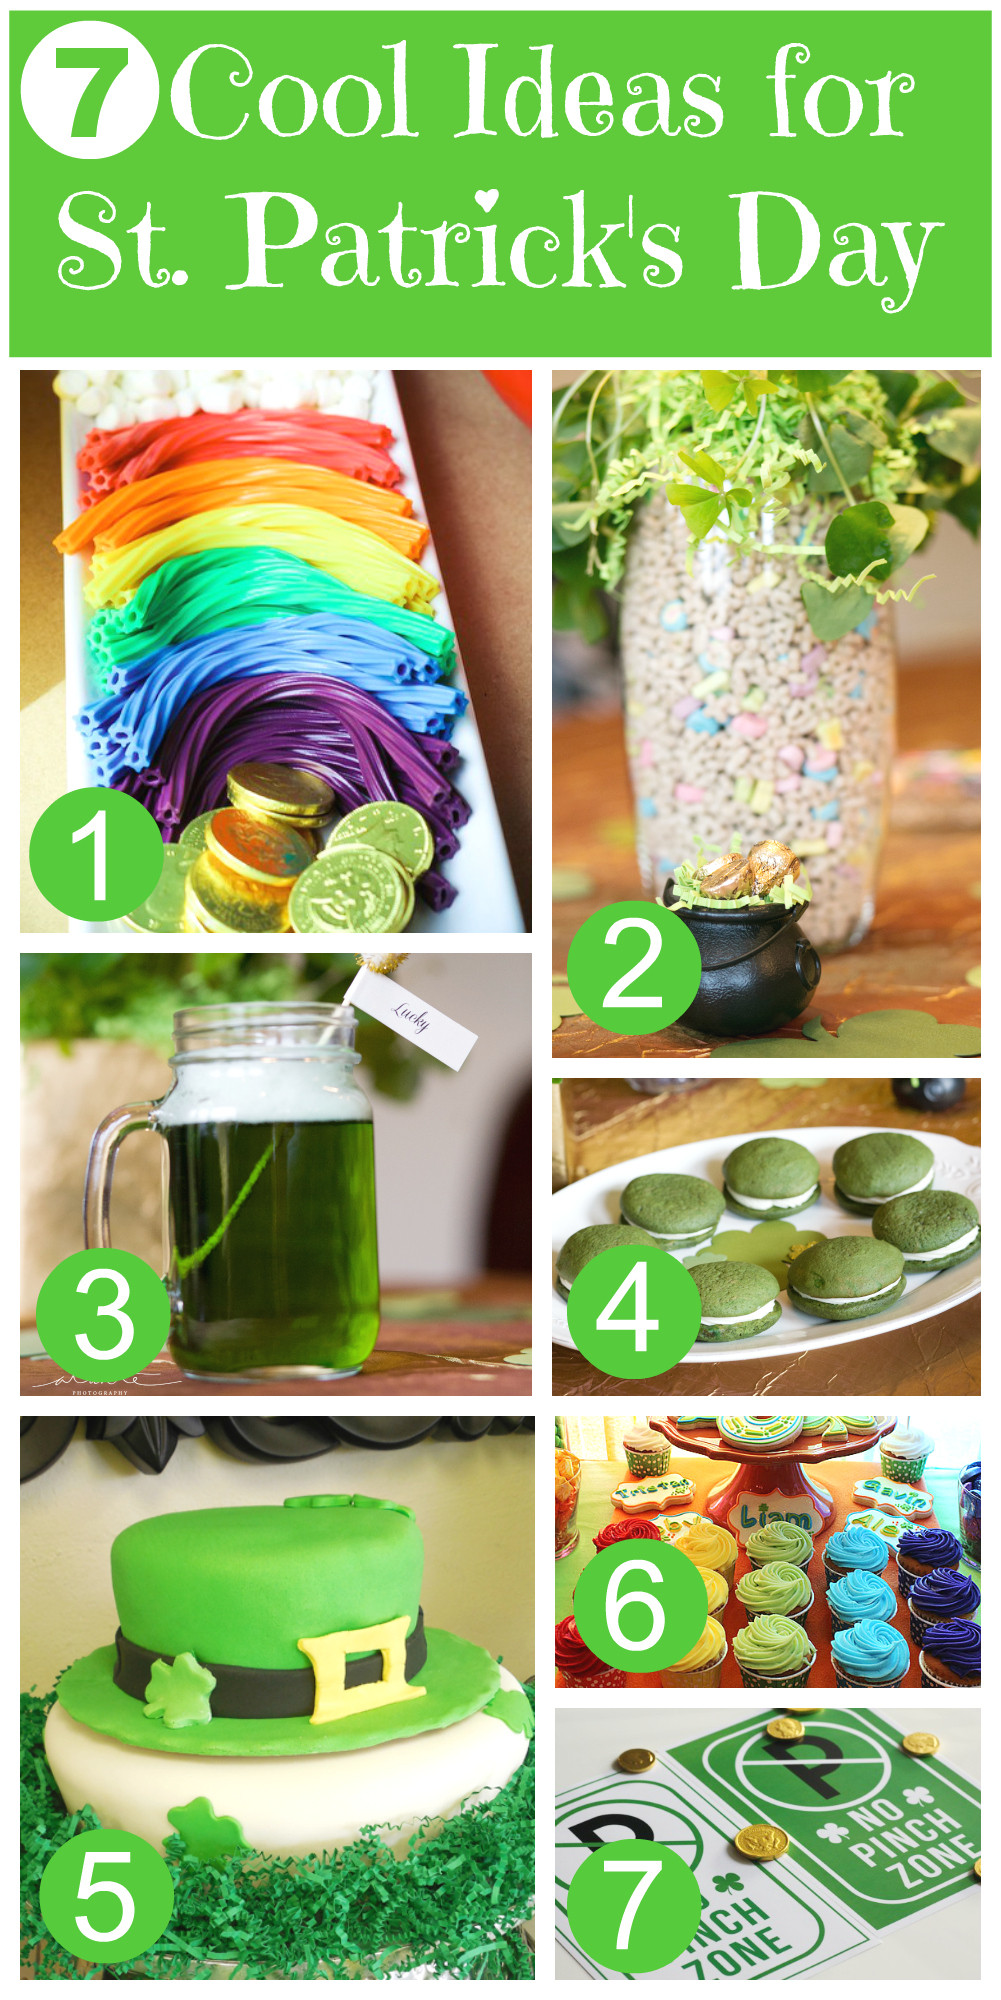 St Patrick's Day Gift Ideas
 7 Cool Party Ideas for St Patrick s Day